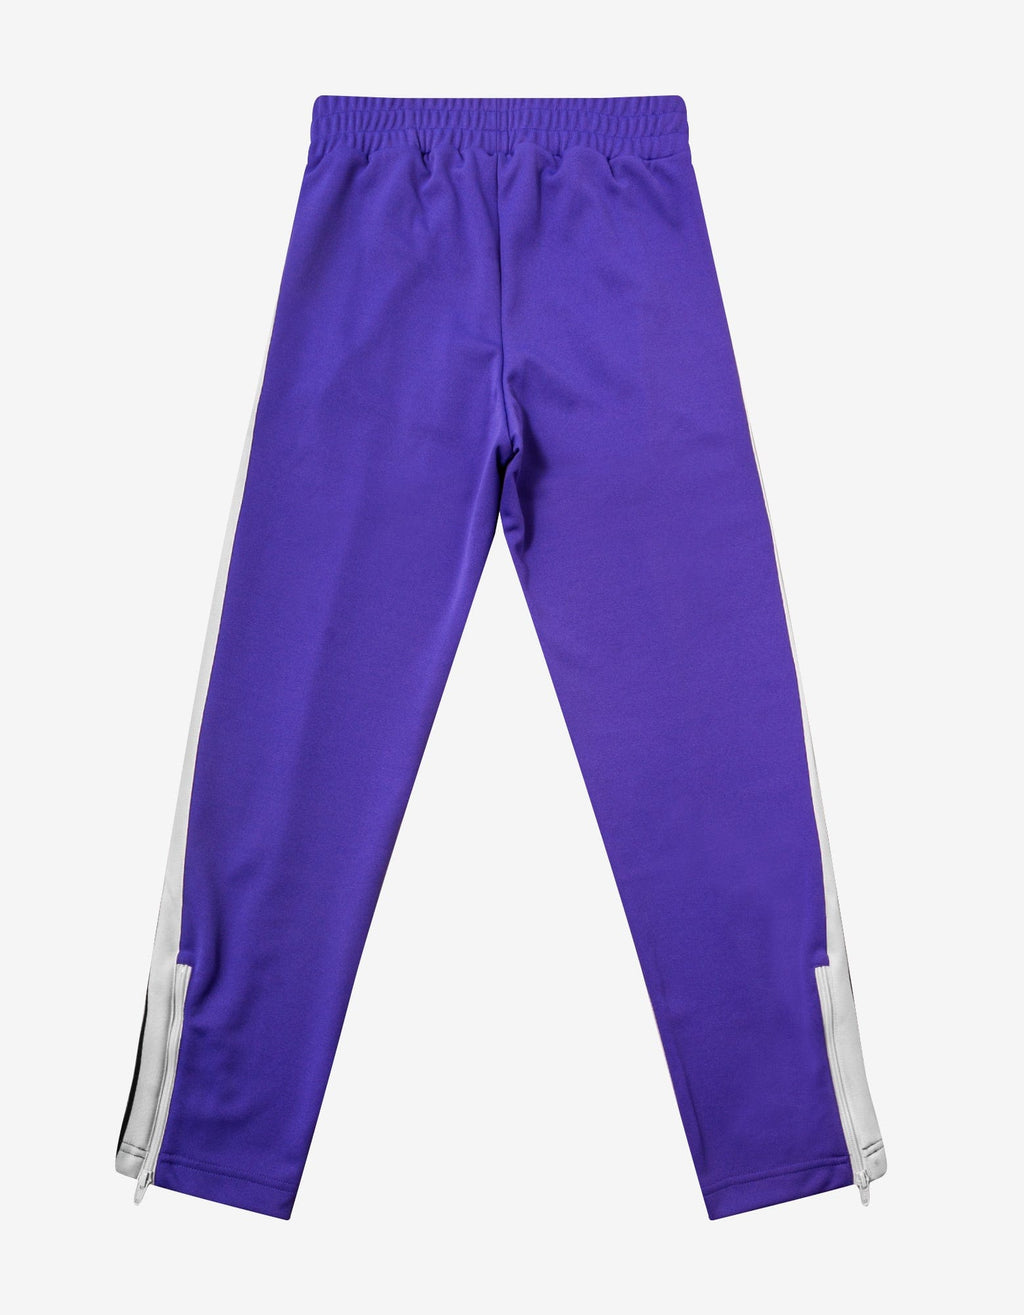 Palm Angels Purple Track Pants with Stripes